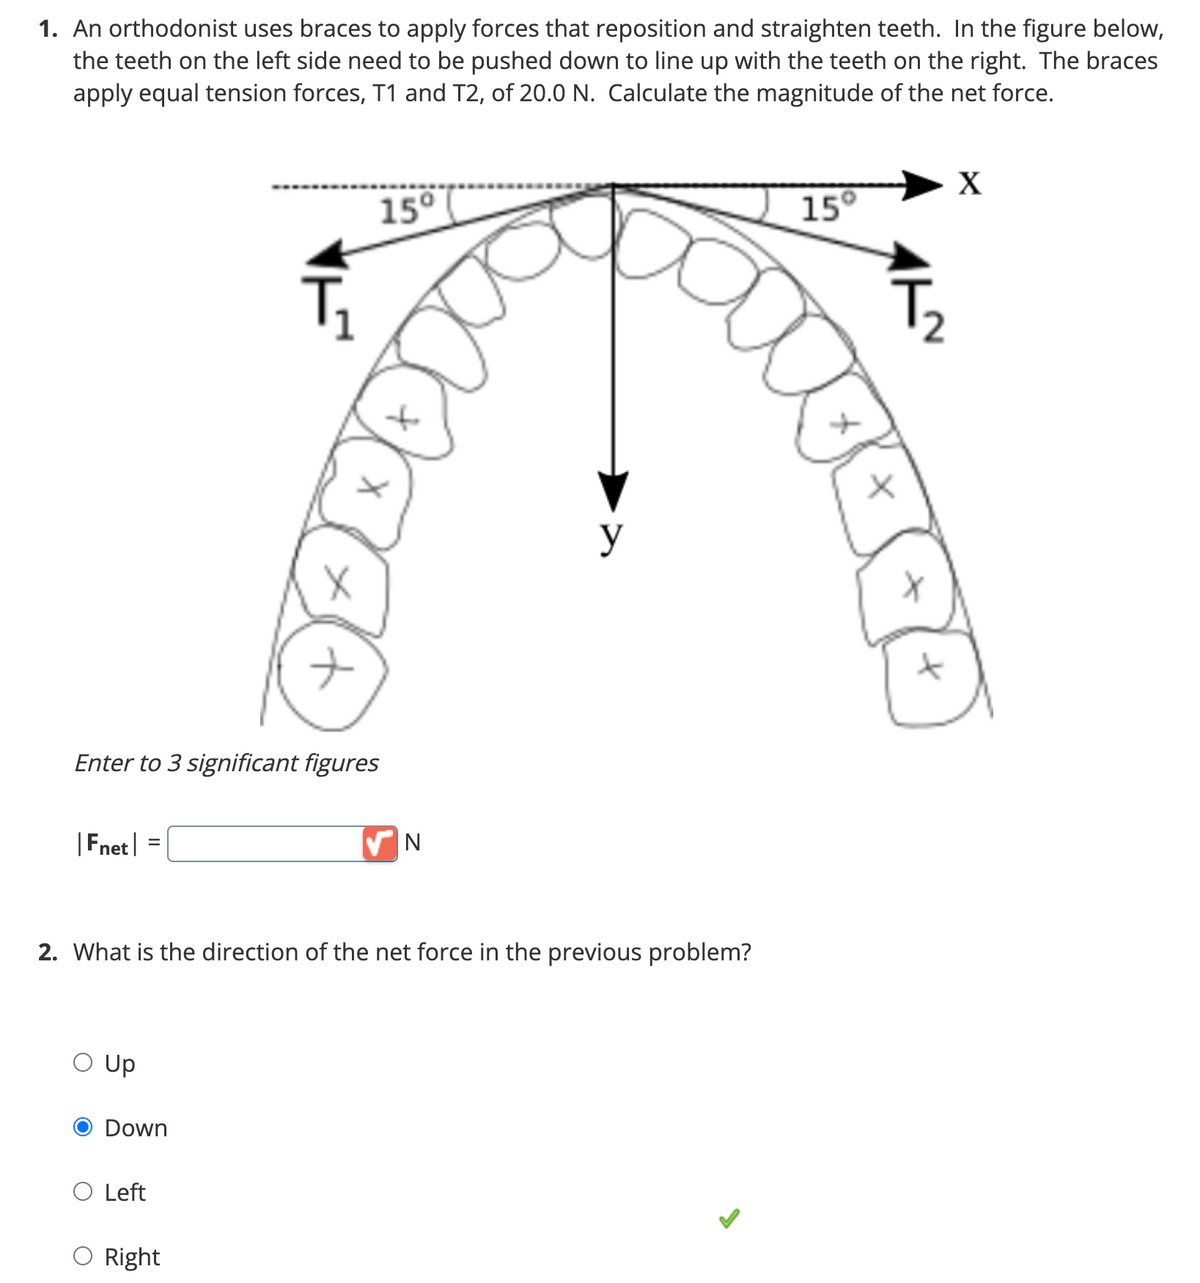 1. An orthodonist uses braces to apply forces that reposition and straighten teeth. In the figure below,
the teeth on the left side need to be pushed down to line up with the teeth on the right. The braces
apply equal tension forces, T1 and T2, of 20.0 N. Calculate the magnitude of the net force.
|Fnet
Enter to 3 significant figures
O UP
Down
X
ナ
O Left
15⁰
2. What is the direction of the net force in the previous problem?
Right
✔N
y
15°
X